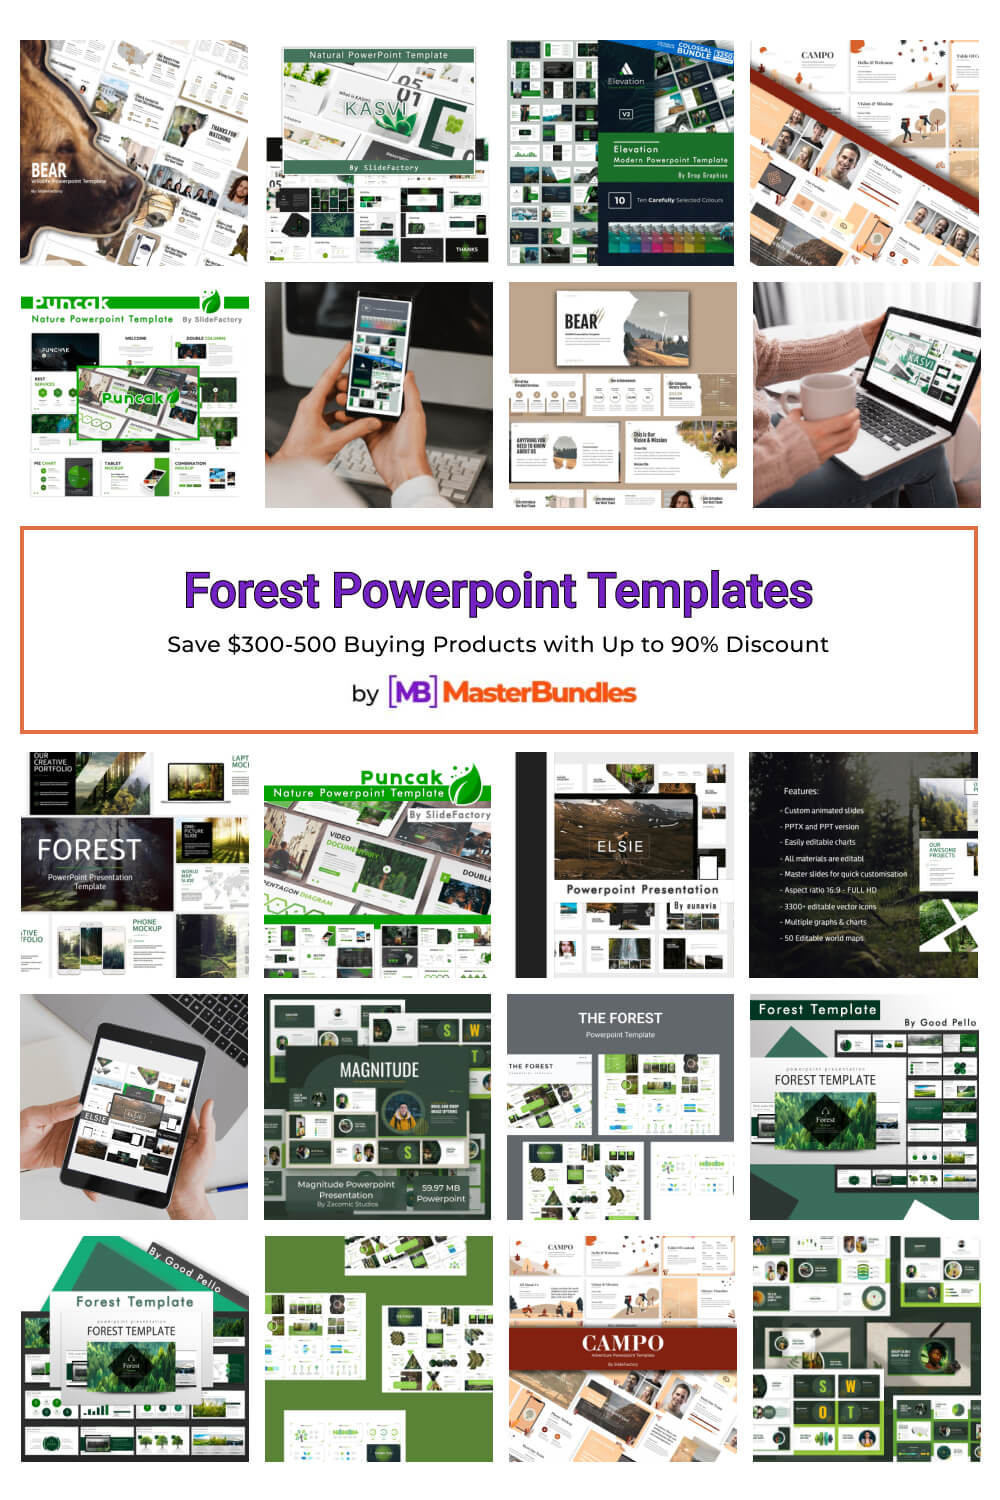 forest powerpoint templates pinterest image.